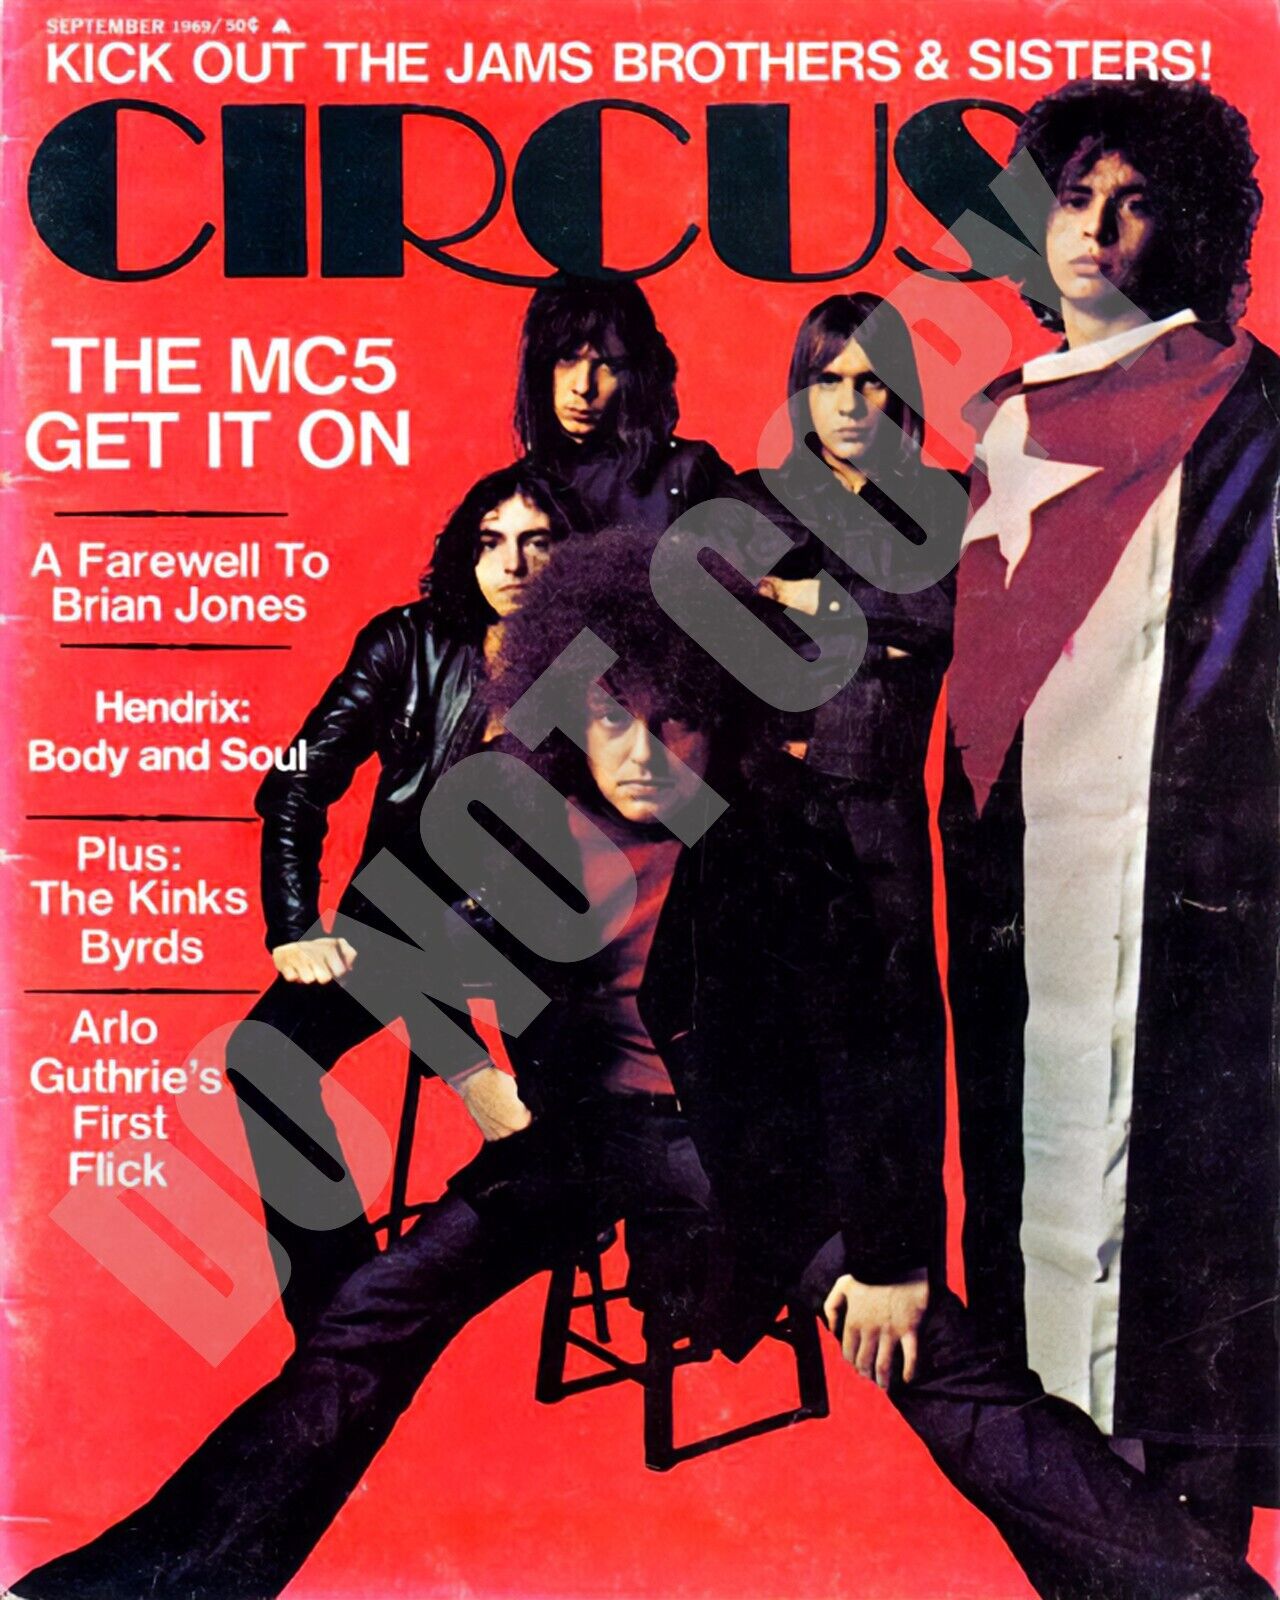 Sept 1969 Detroit MC5 On The Cover of Circus Music Magazine 8x10 Photo